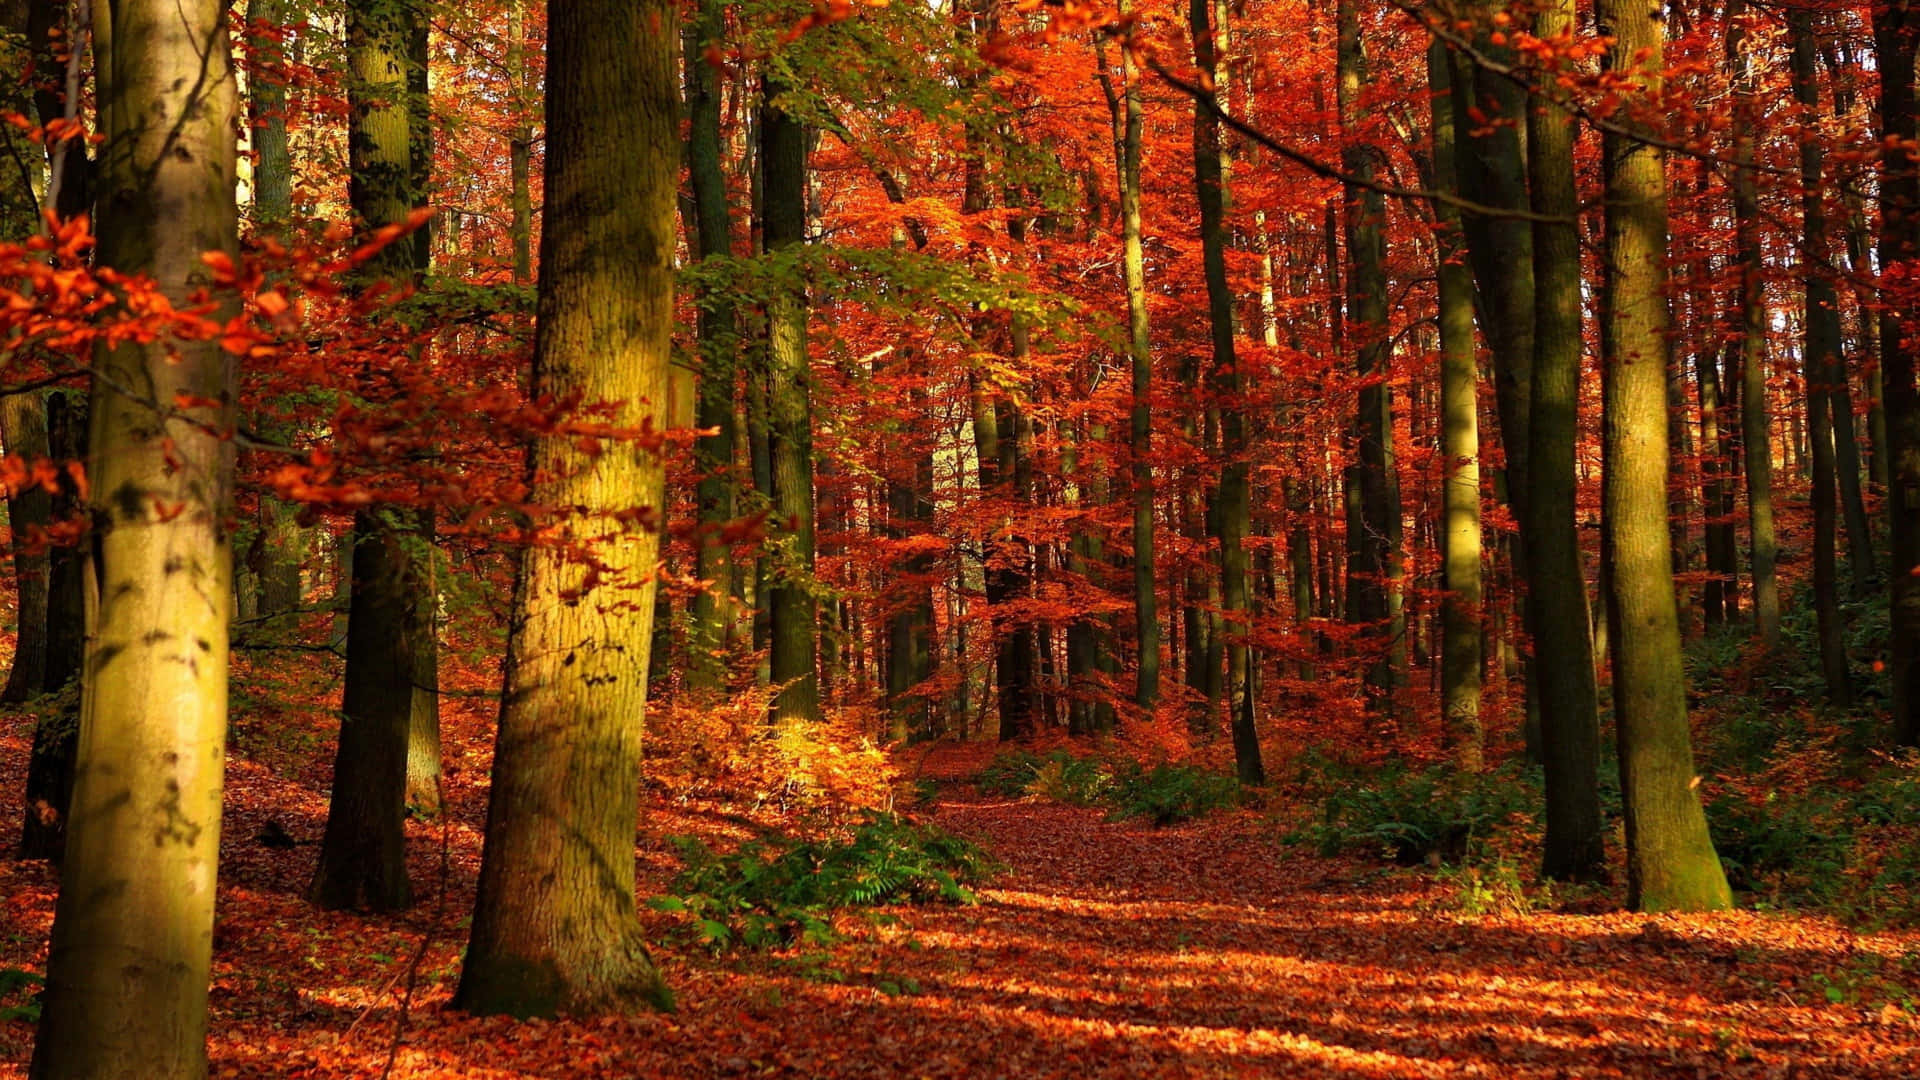 Walk through the stunning autumnal colors of nature Wallpaper